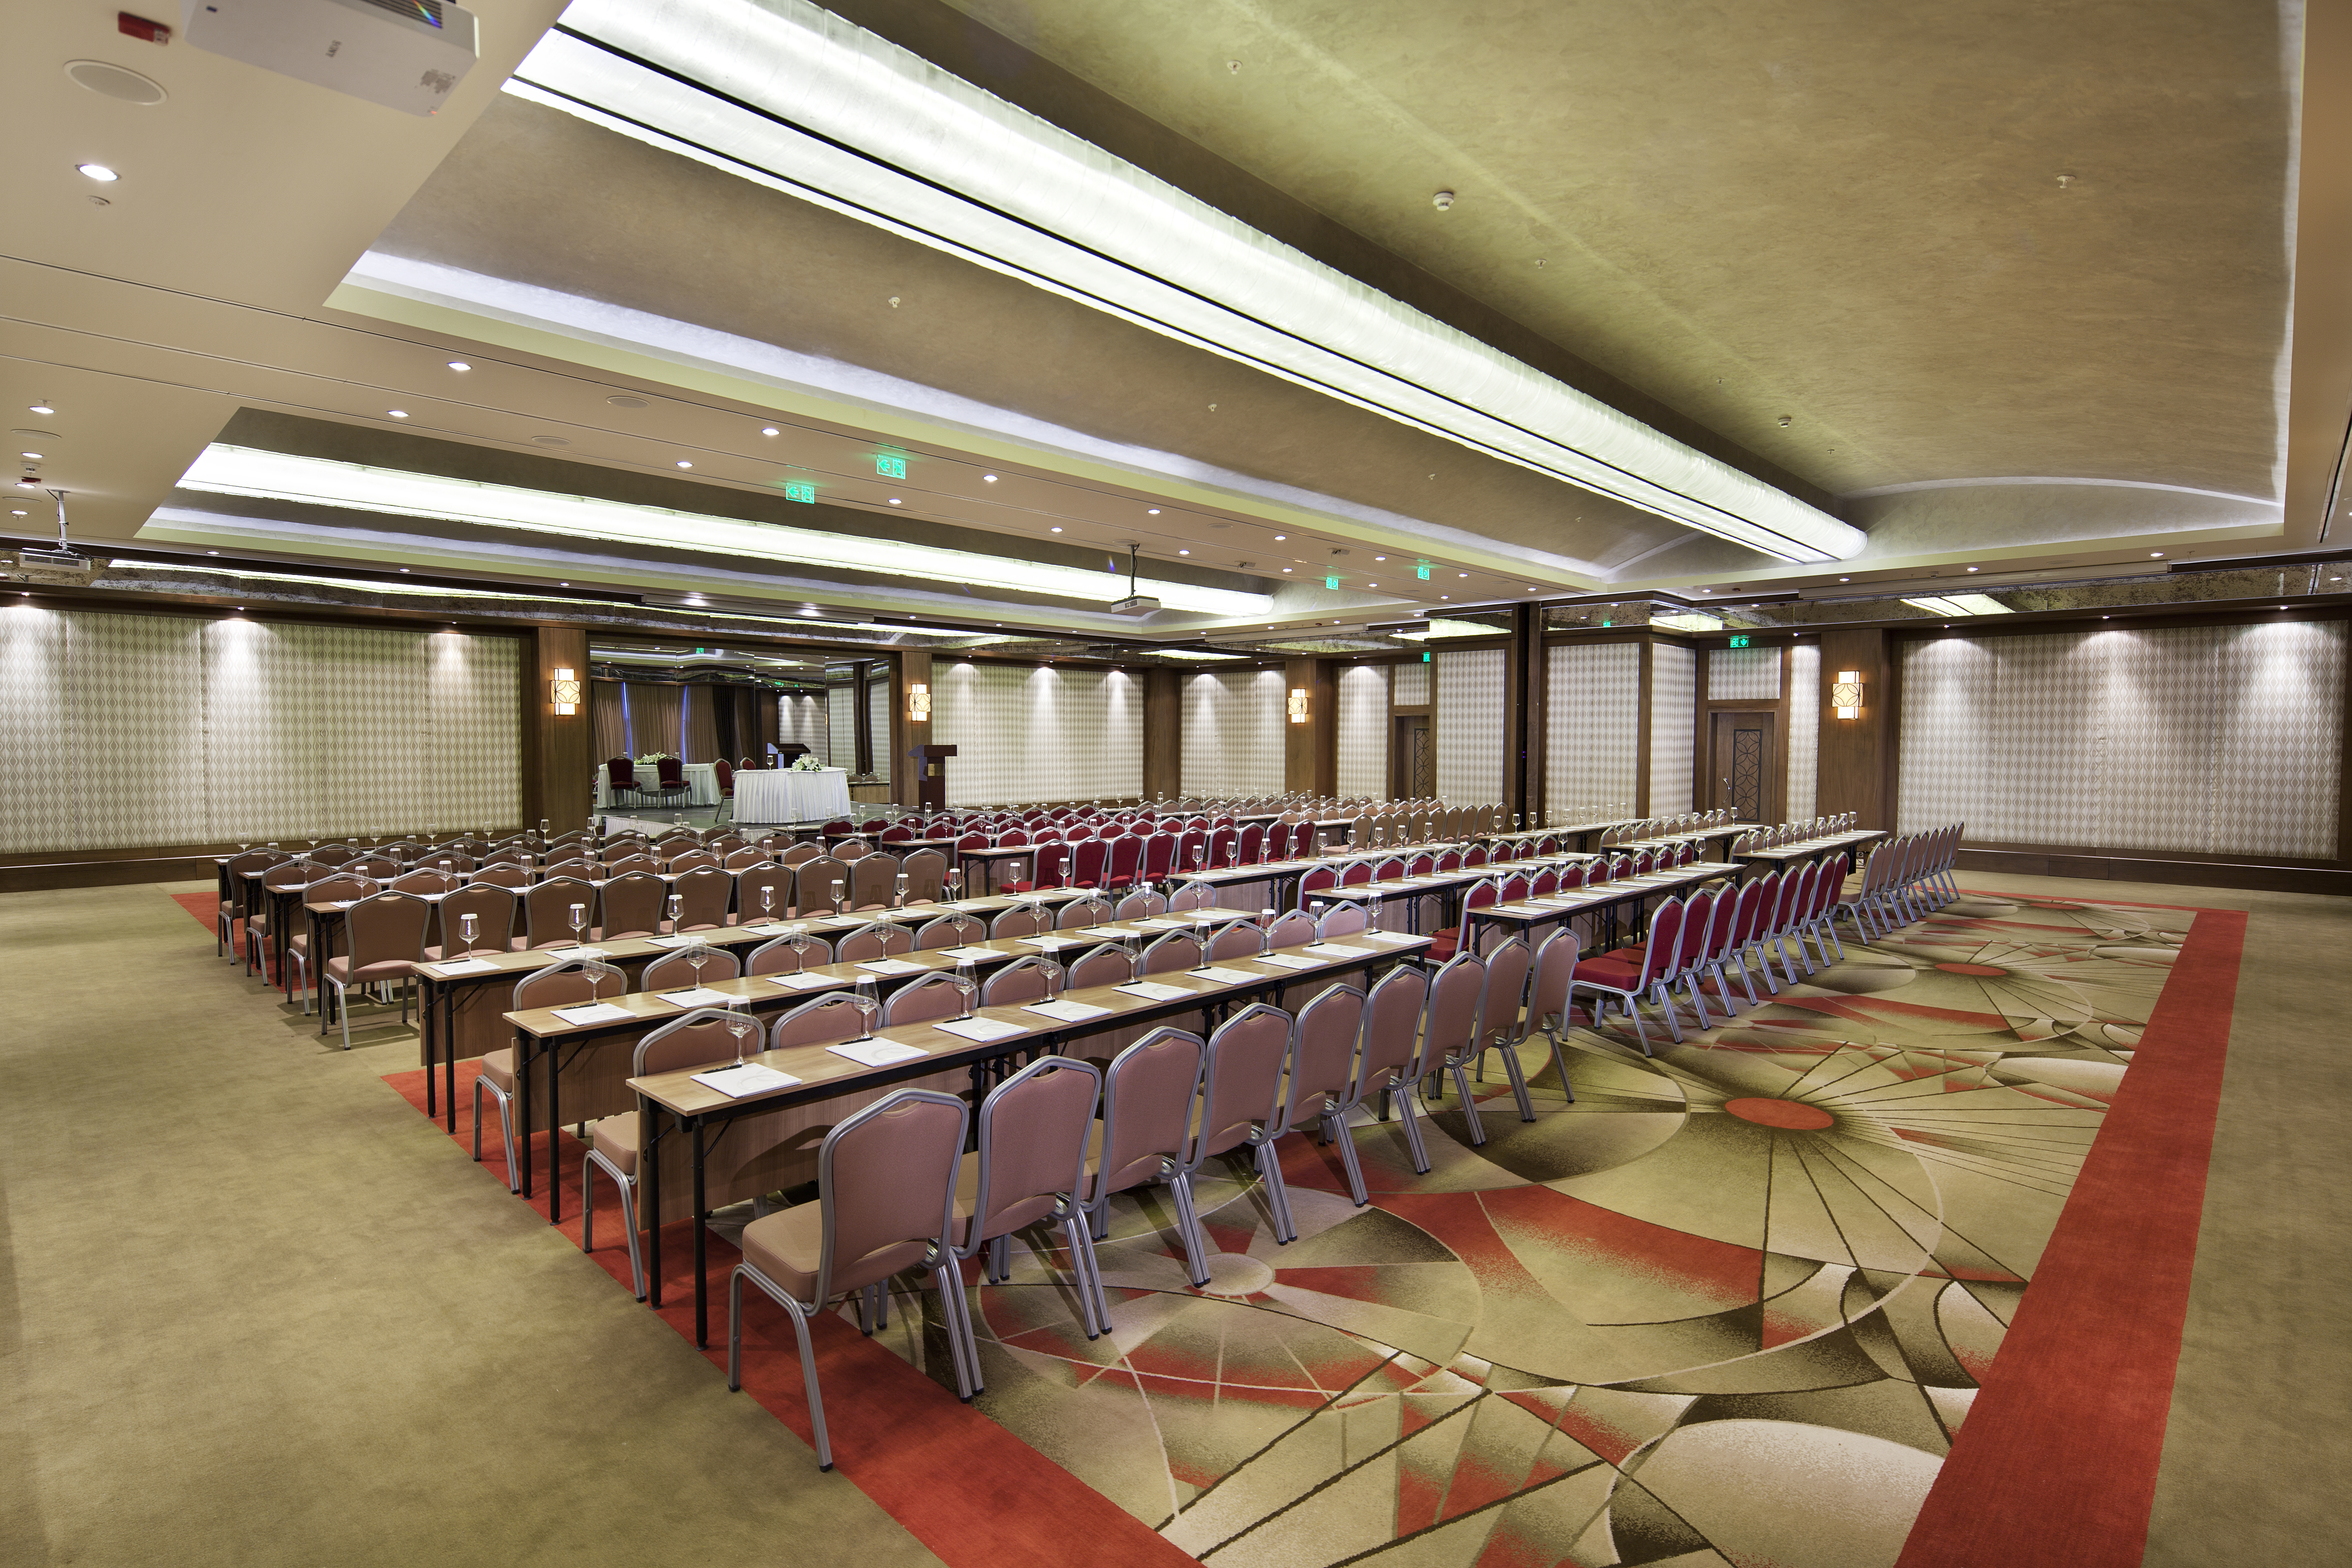 Classroom Setup in Ballroom With Tables and Chairs Facing Presenter's Table and Podium